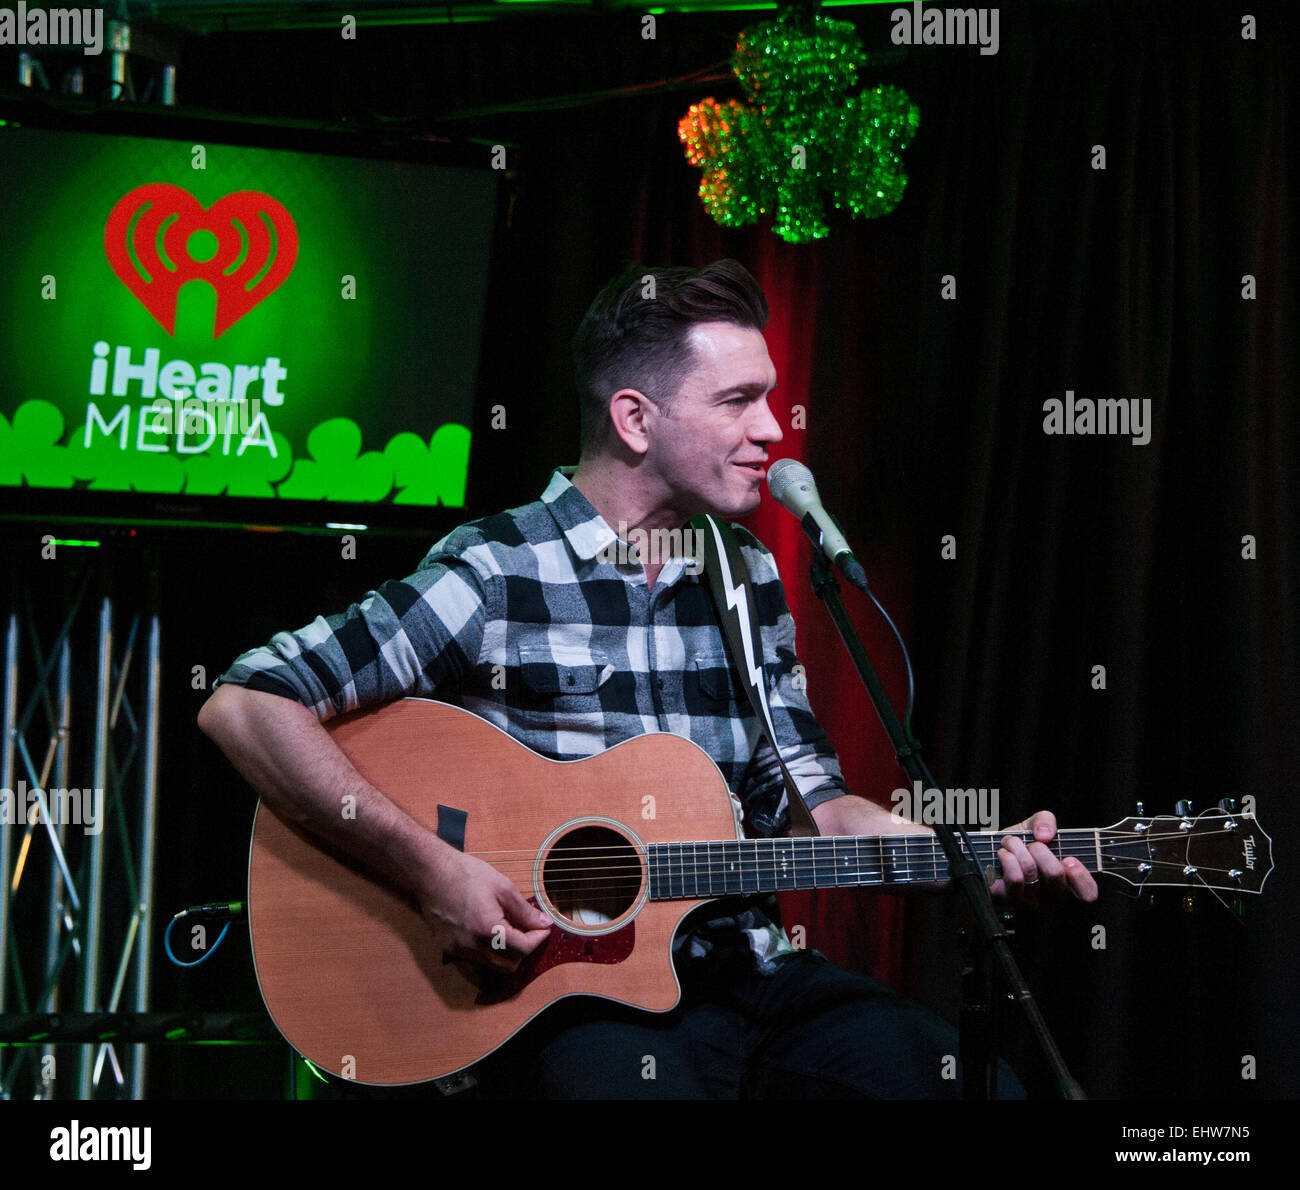 Bala Cynwyd, Pennsylvania, USA. 17th March, 2015. American Singer-Songwriter Andy Grammer Performs at Mix 106's Performance Theatre on March 17, 2015 in Bala Cynwyd, Pennsylvania, United States. Credit:  Paul Froggatt/Alamy Live News Stock Photo